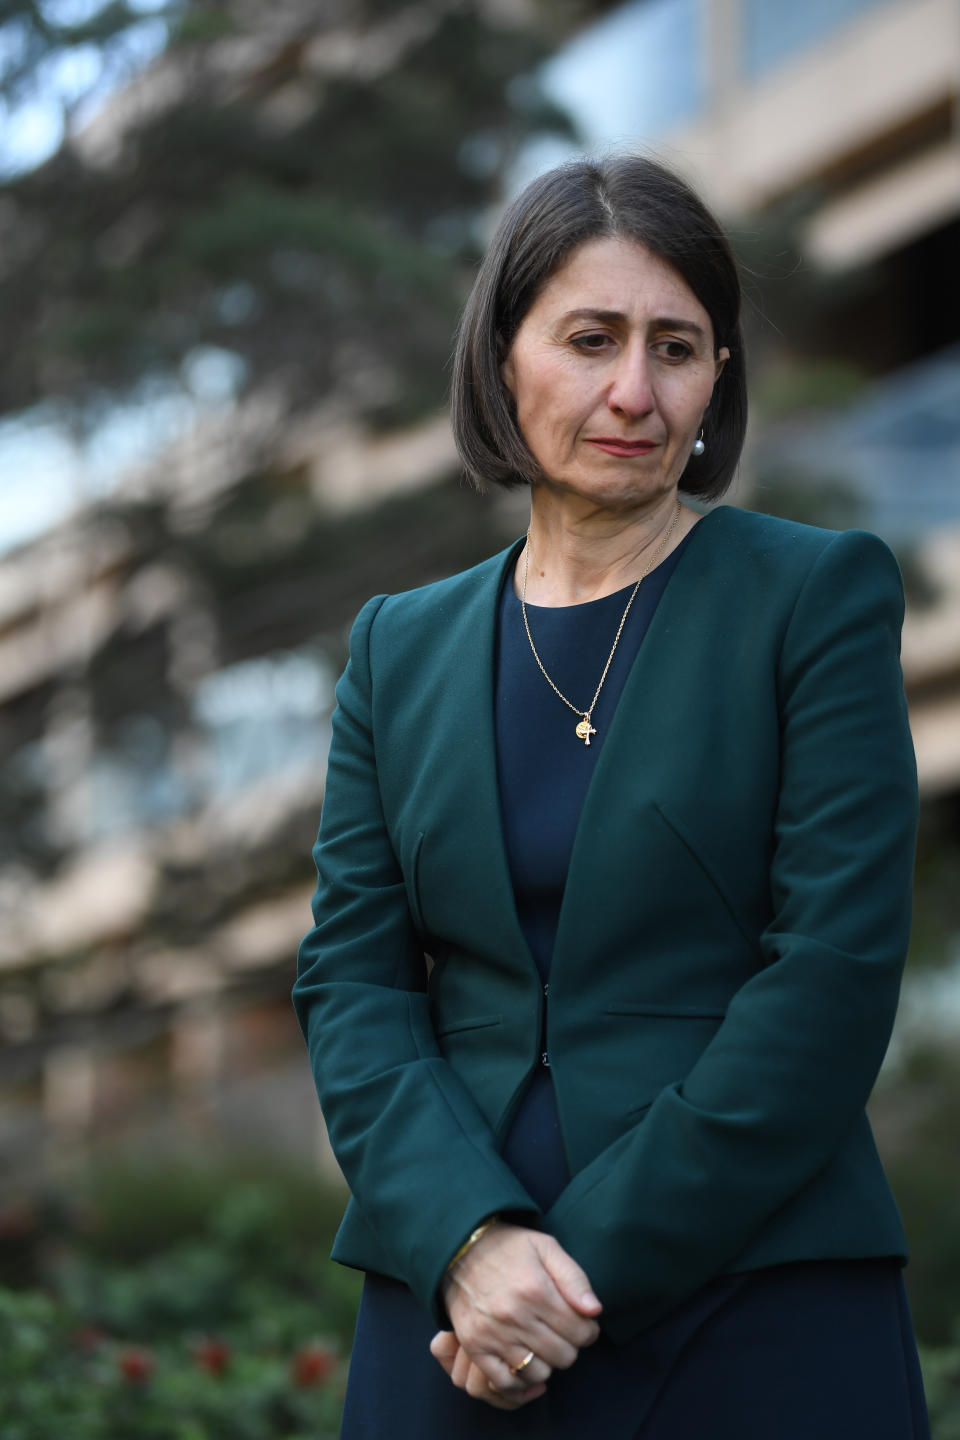 NSW Premier Gladys Berejiklian confessed on Monday that Daryl Maguire was never her boyfriend. Source: AAP